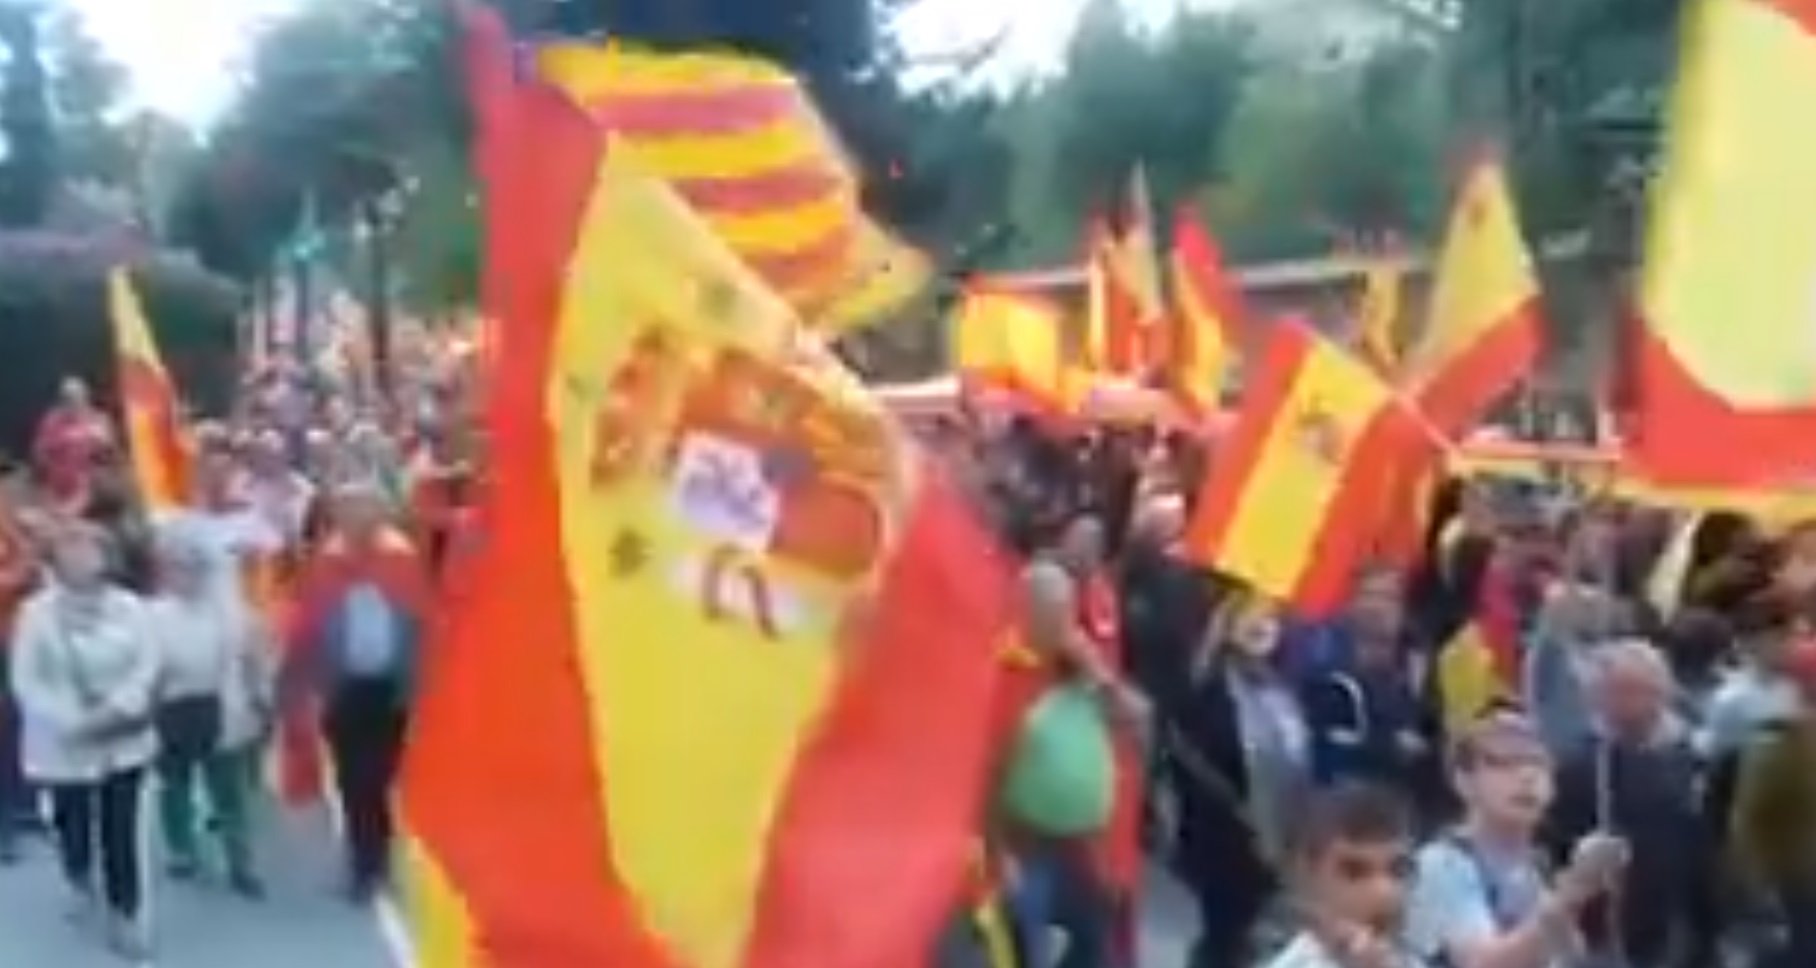 Man attacked after pro-Spain demonstration in Mataró